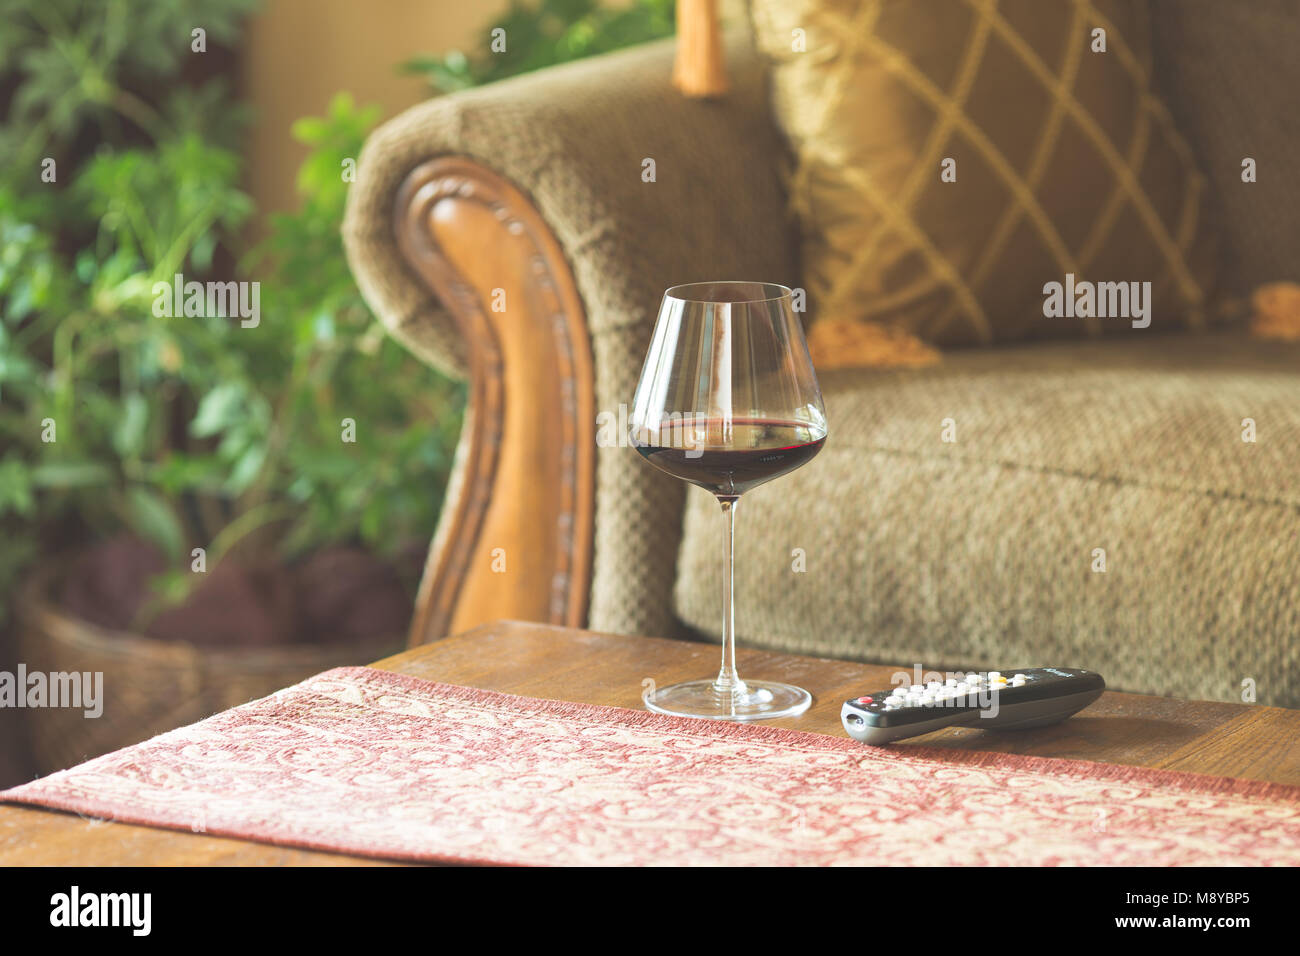 A glass of red wine on a coffee table next to the TV remote Stock Photo